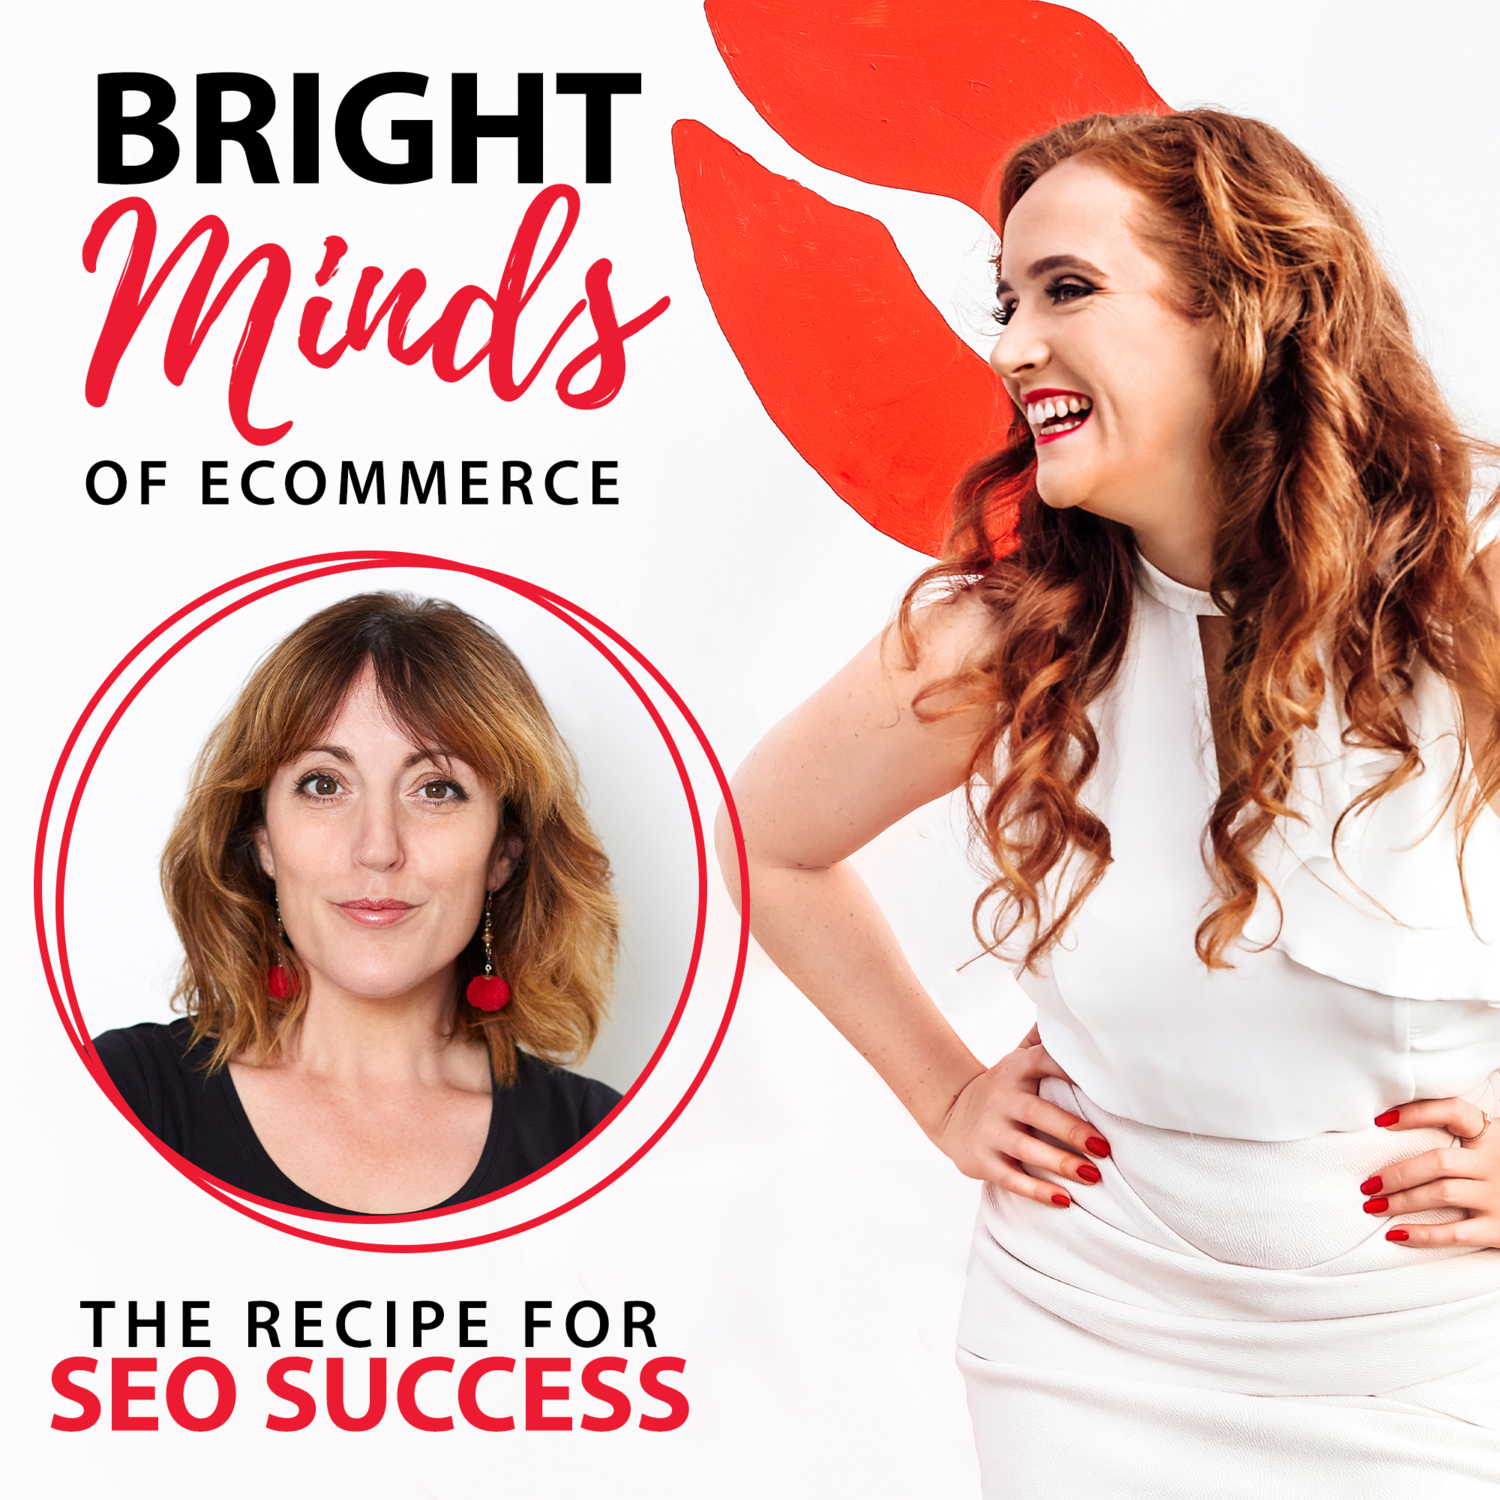 #2 eCommerce SEO and Copywriting with Kate Toon from The Recipe of SEO Success